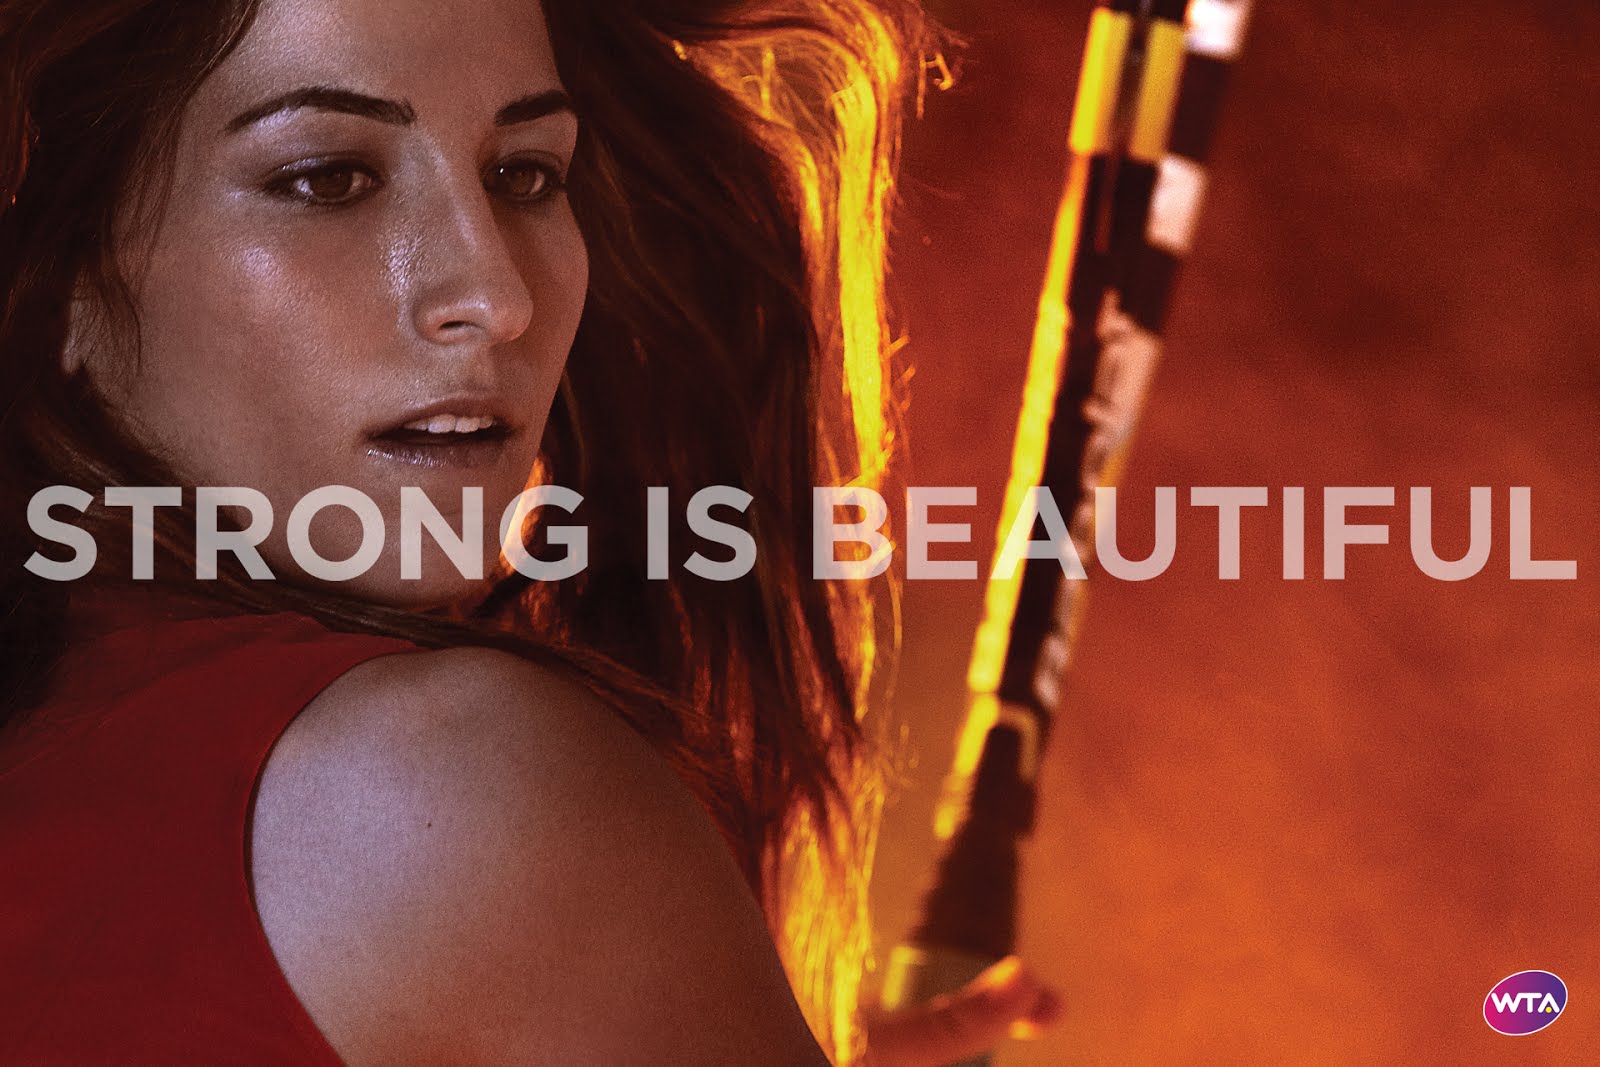 Strong and beautiful. Strong is beautiful